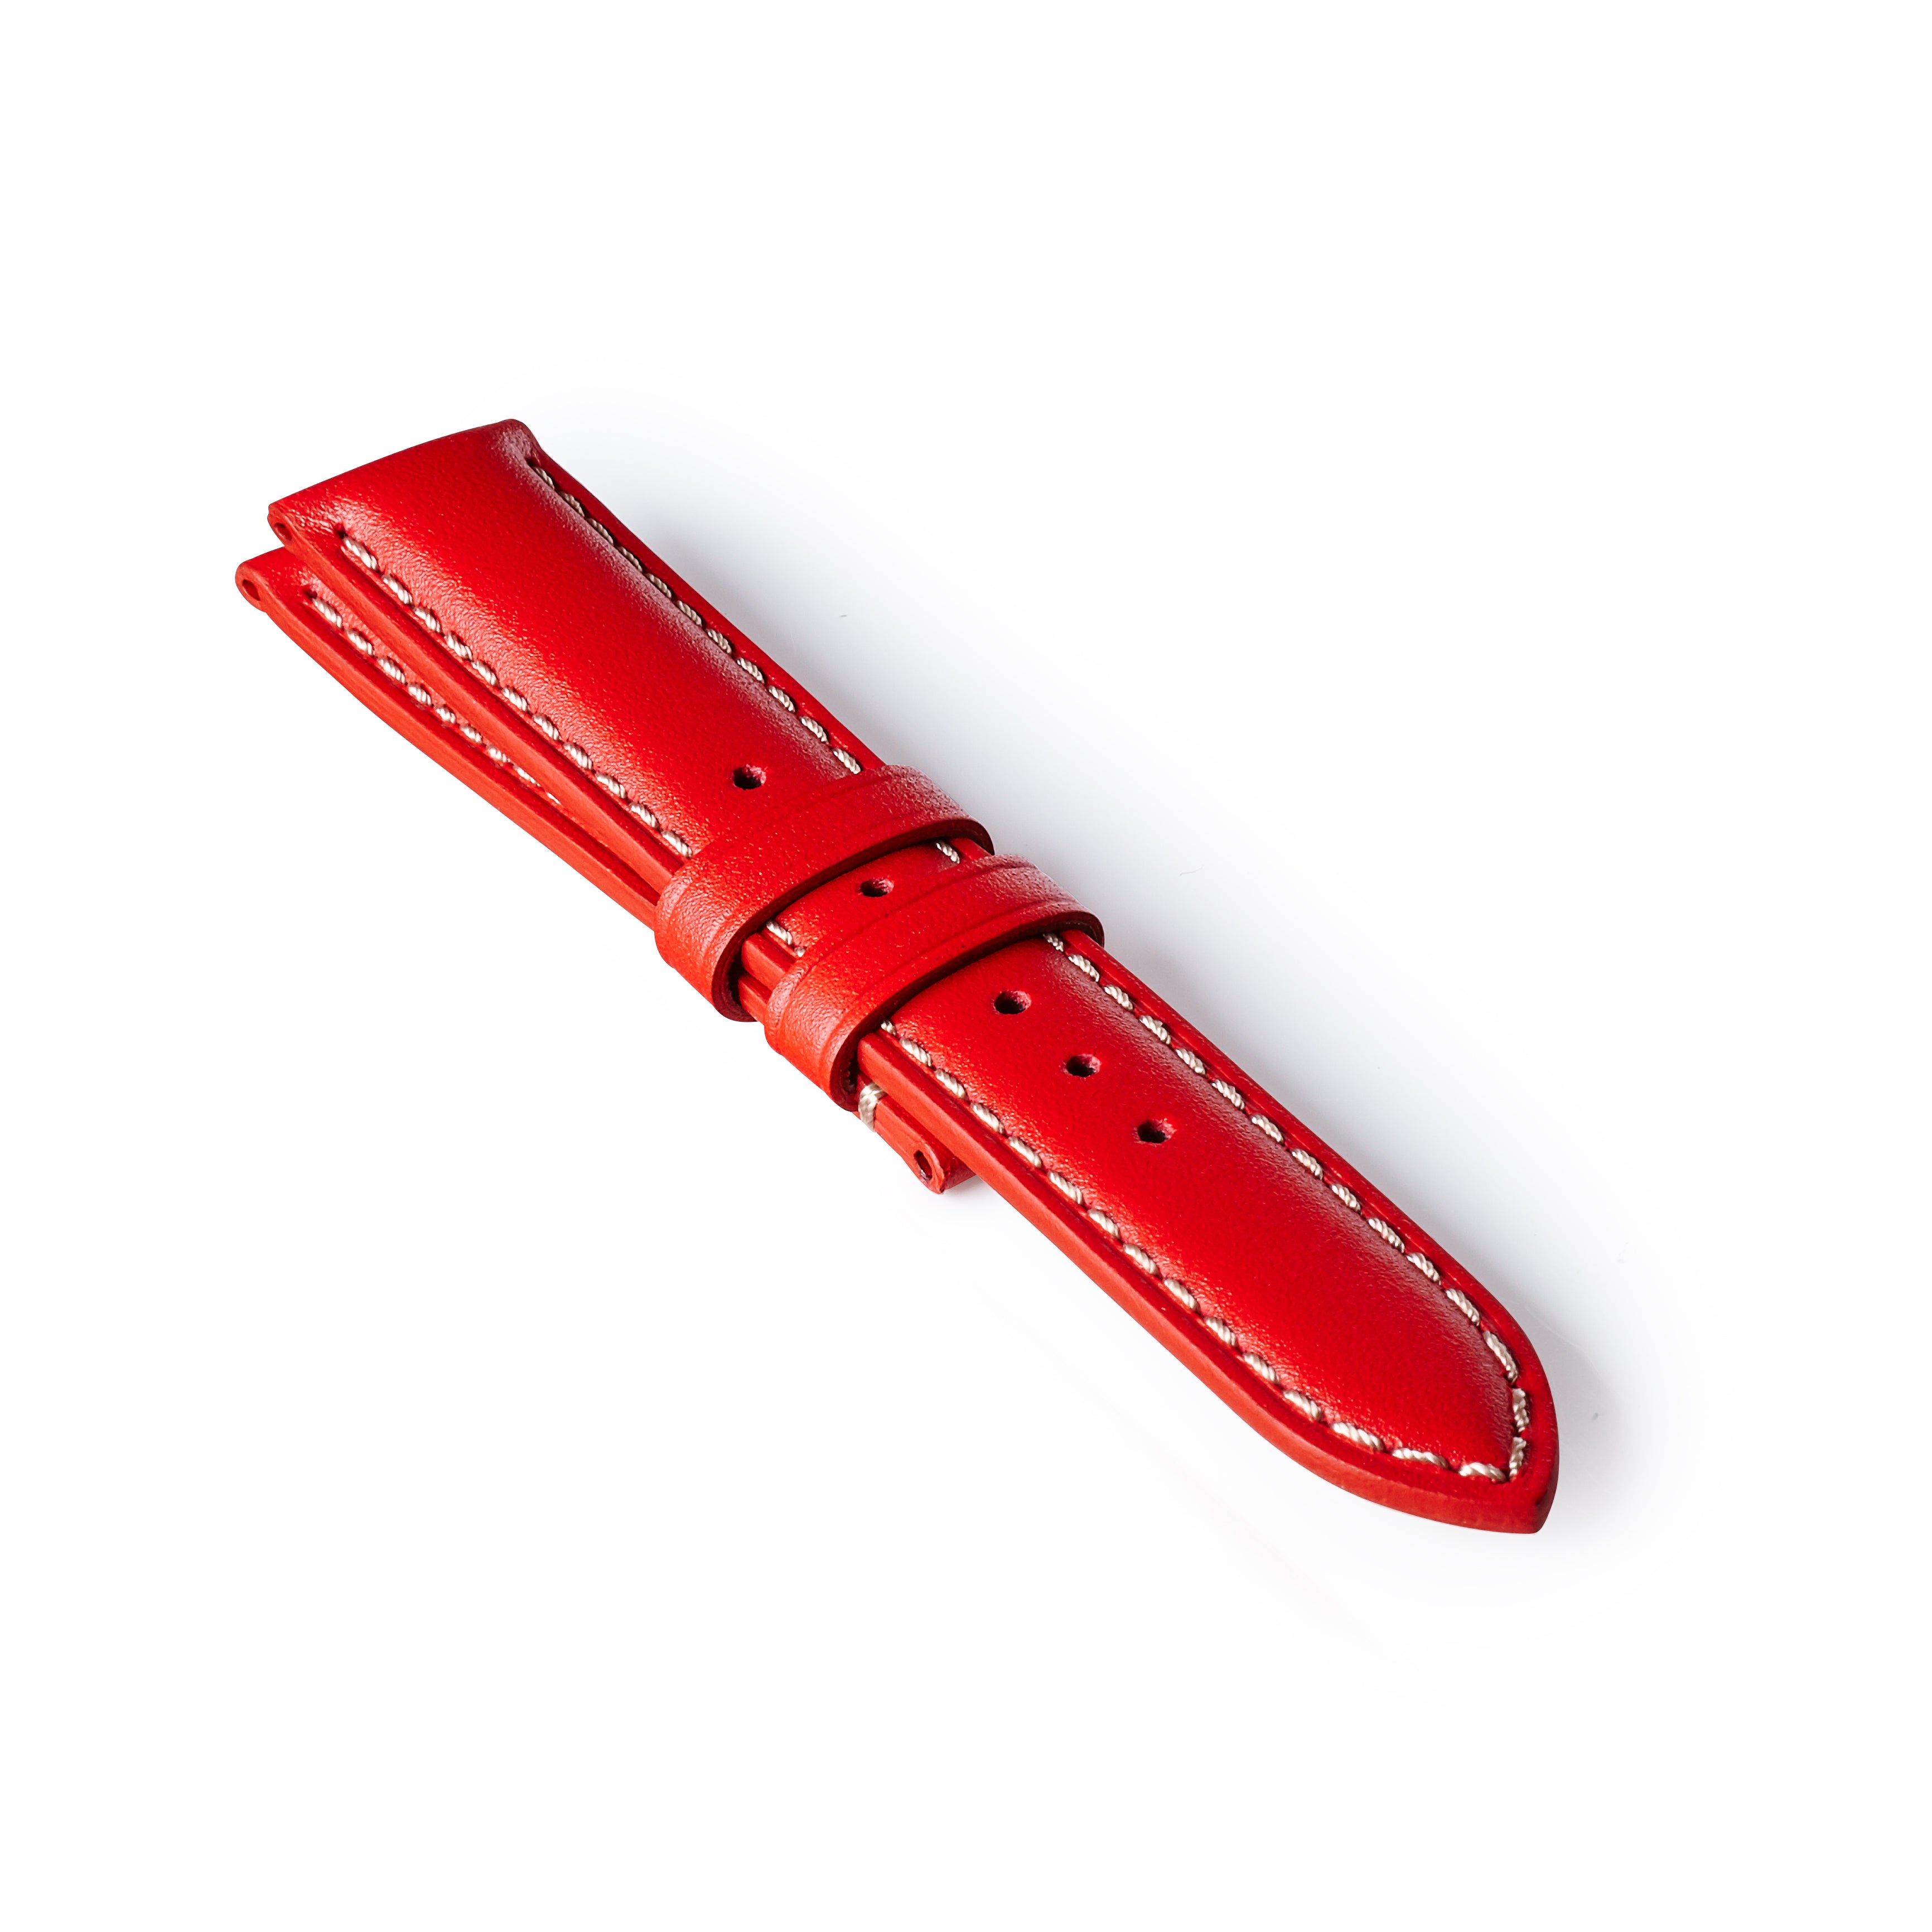 SWATCH - Grade C - Old English Red – American Classics Leather